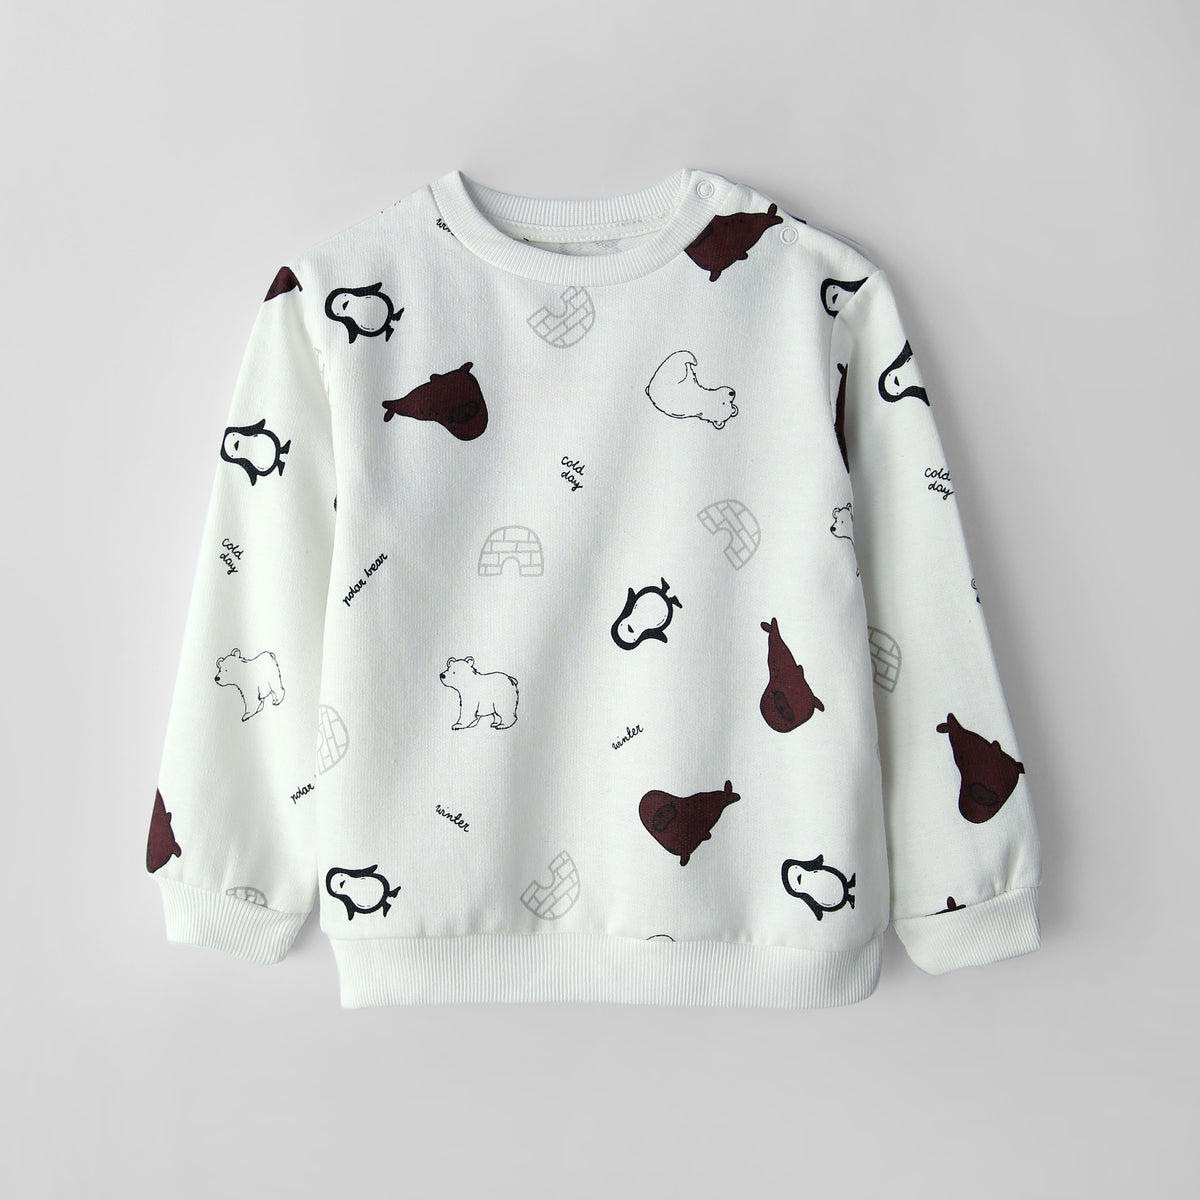 Premium Quality All-Over Printed Sweatshirt With Shoulder Snap Button For Kids